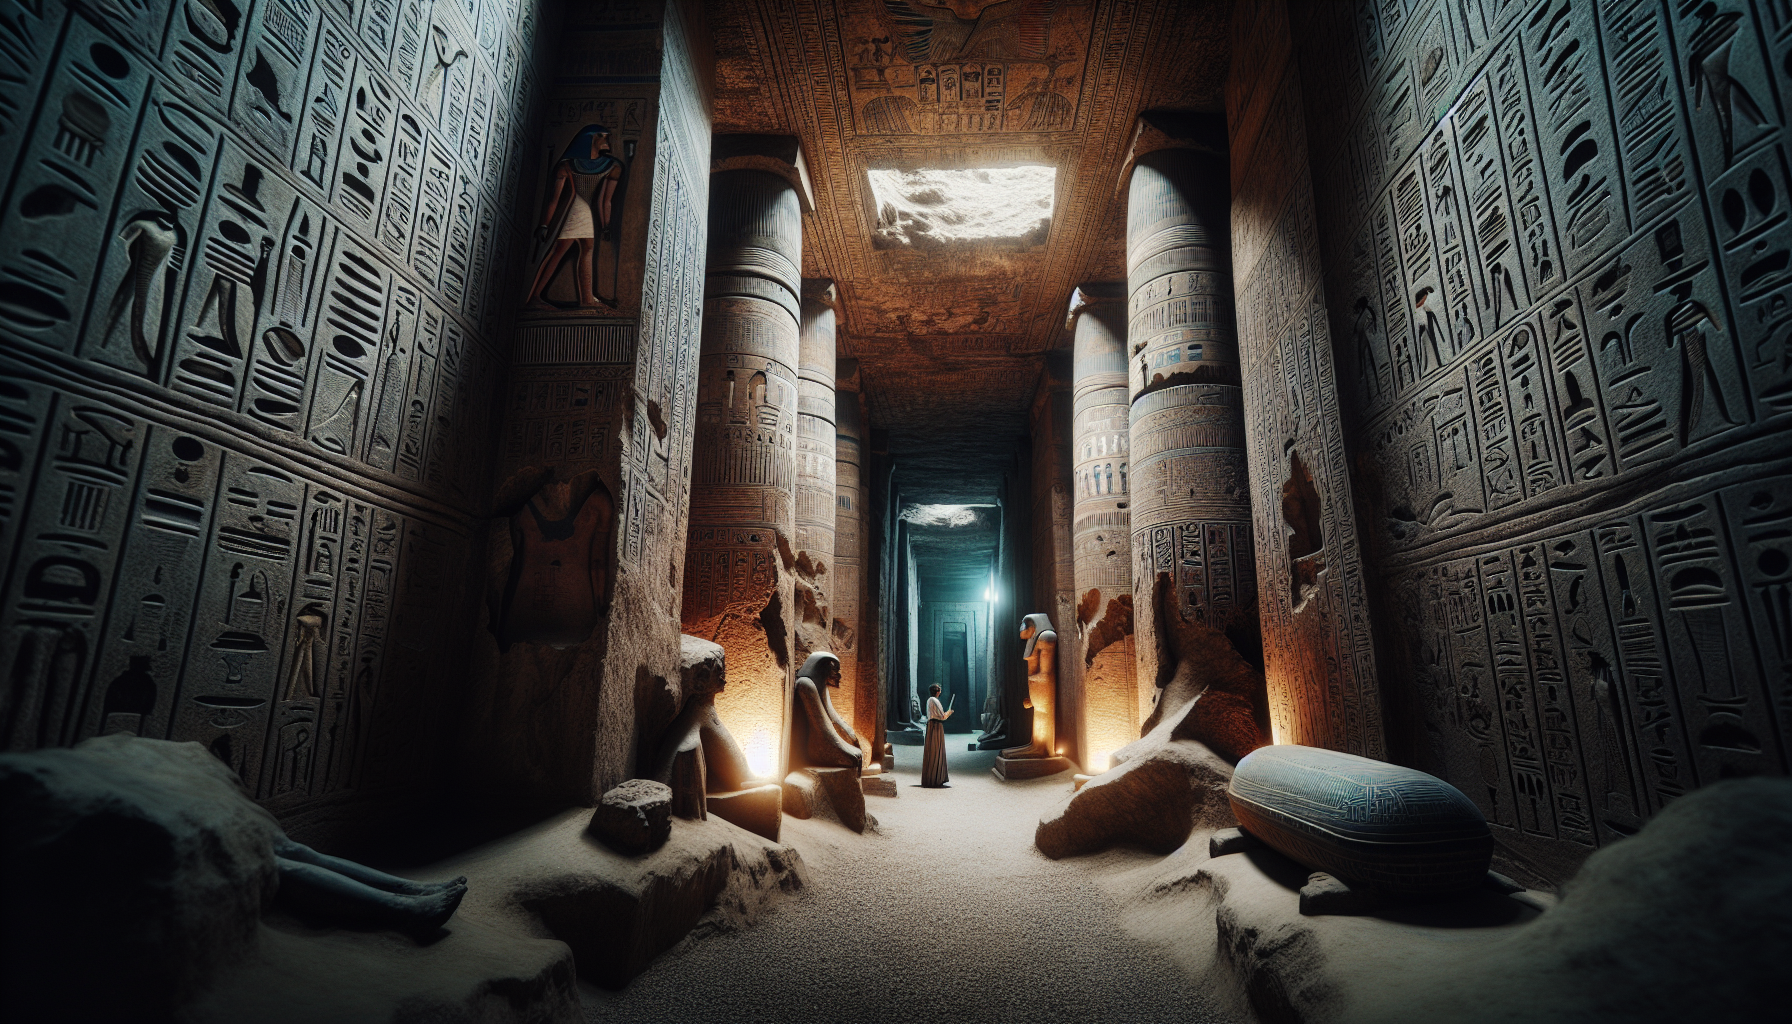 explore the mysteries of theban necropolis, the ancient city of the dead, and discover what lies beneath its enigmatic façade.